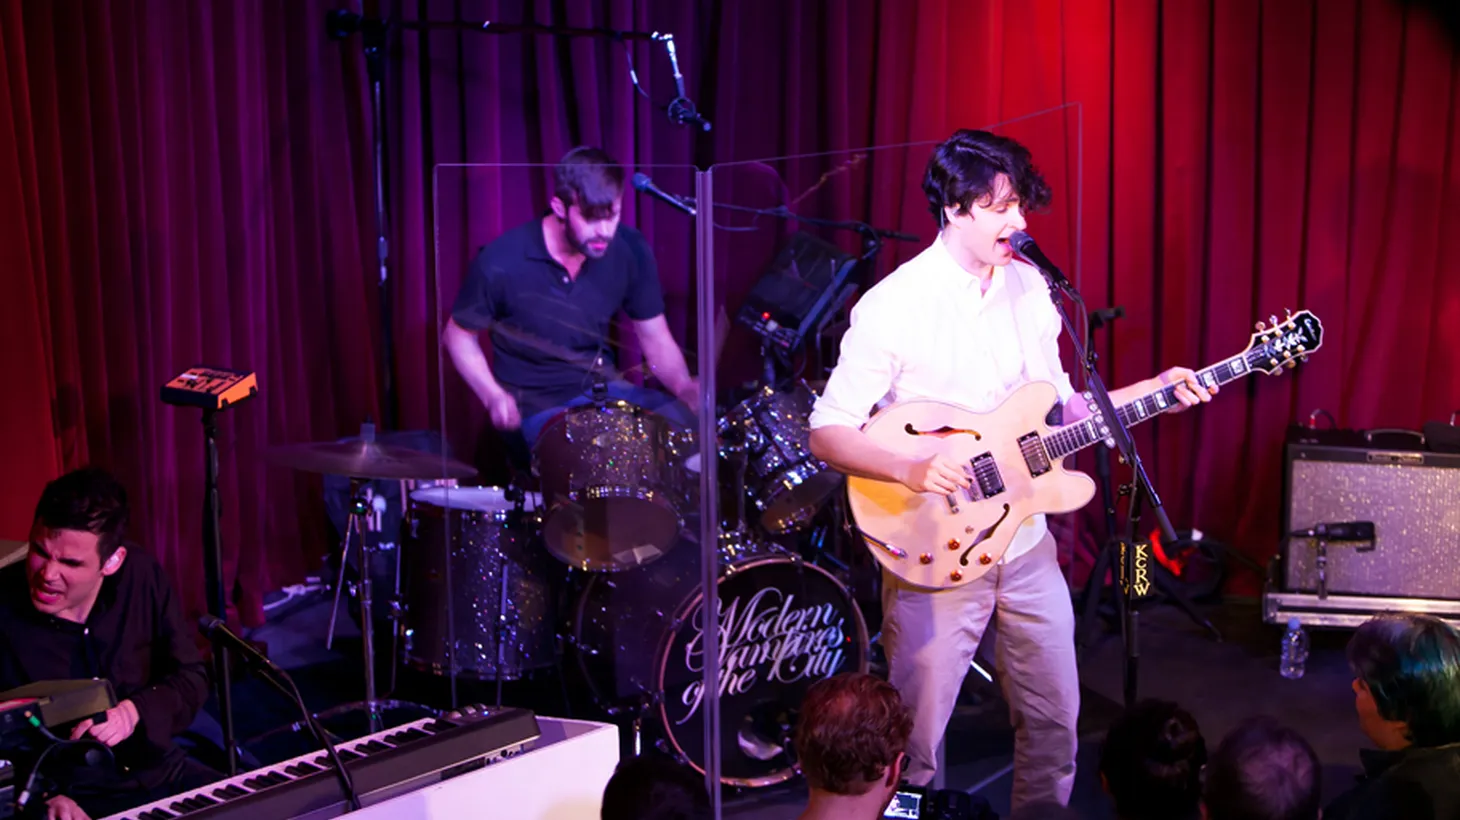 Back in 2013, Vampire Weekend took a break between Coachella weekends to join us for a set in front of a live audience at KCRW's Apogee Sessions, playing new songs and old favorites.